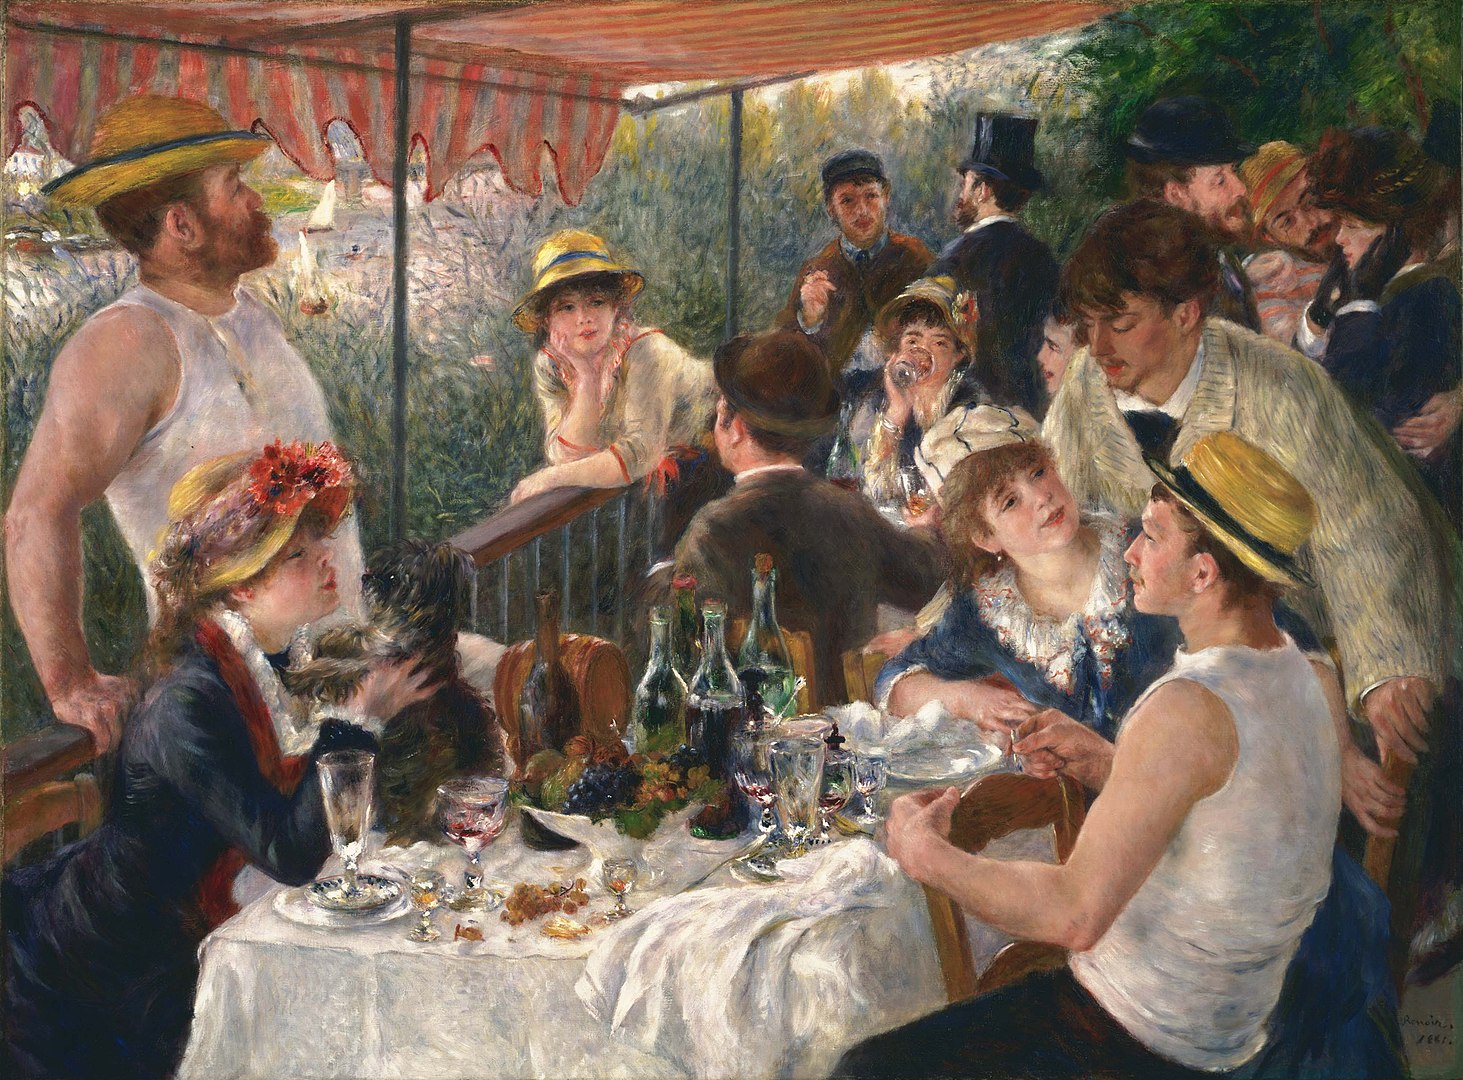 Pierre-Auguste_Renoir_-_Luncheon_of_the_Boating_Party_vs2_Google_Art_Project.jpg